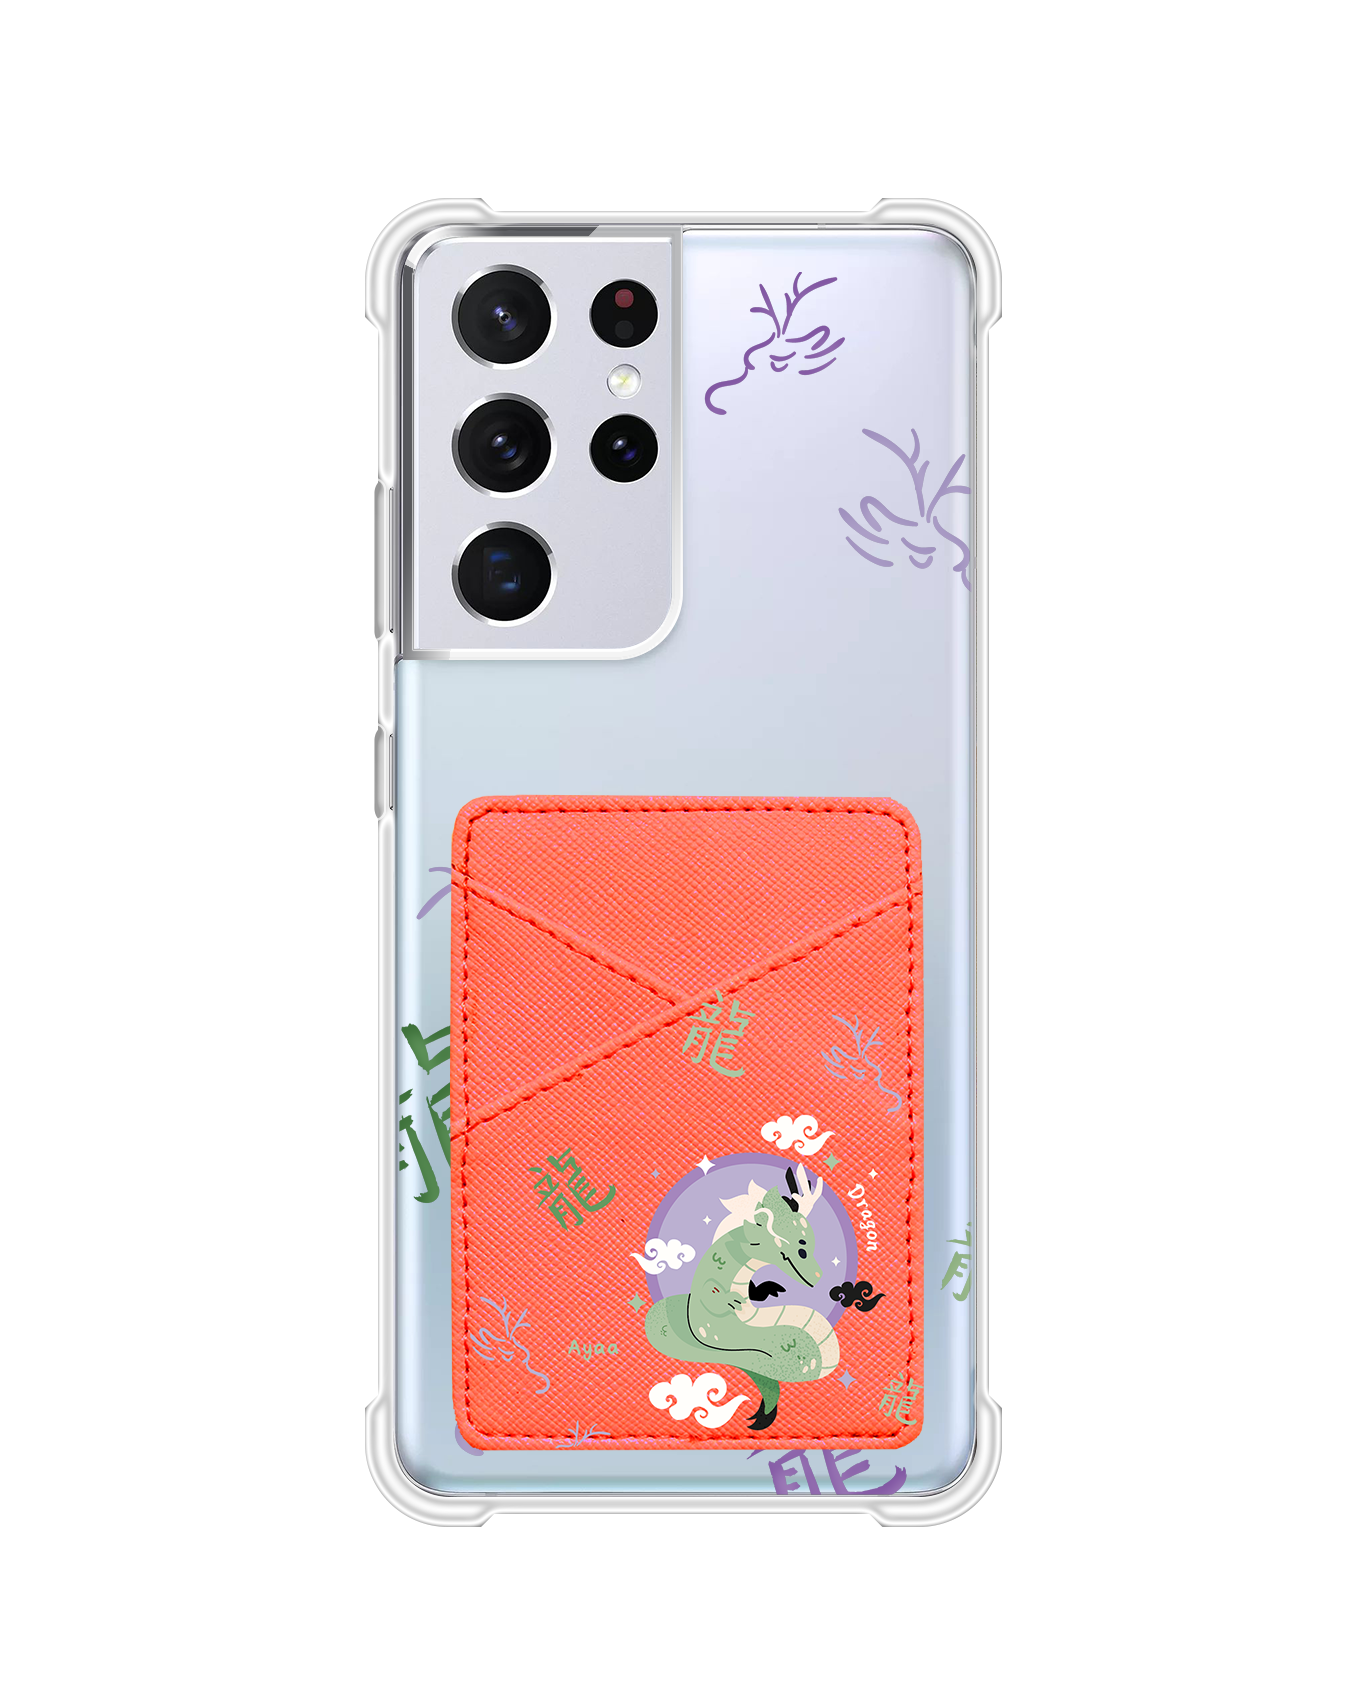 Android Phone Wallet Case - Dragon (Chinese Zodiac / Shio)